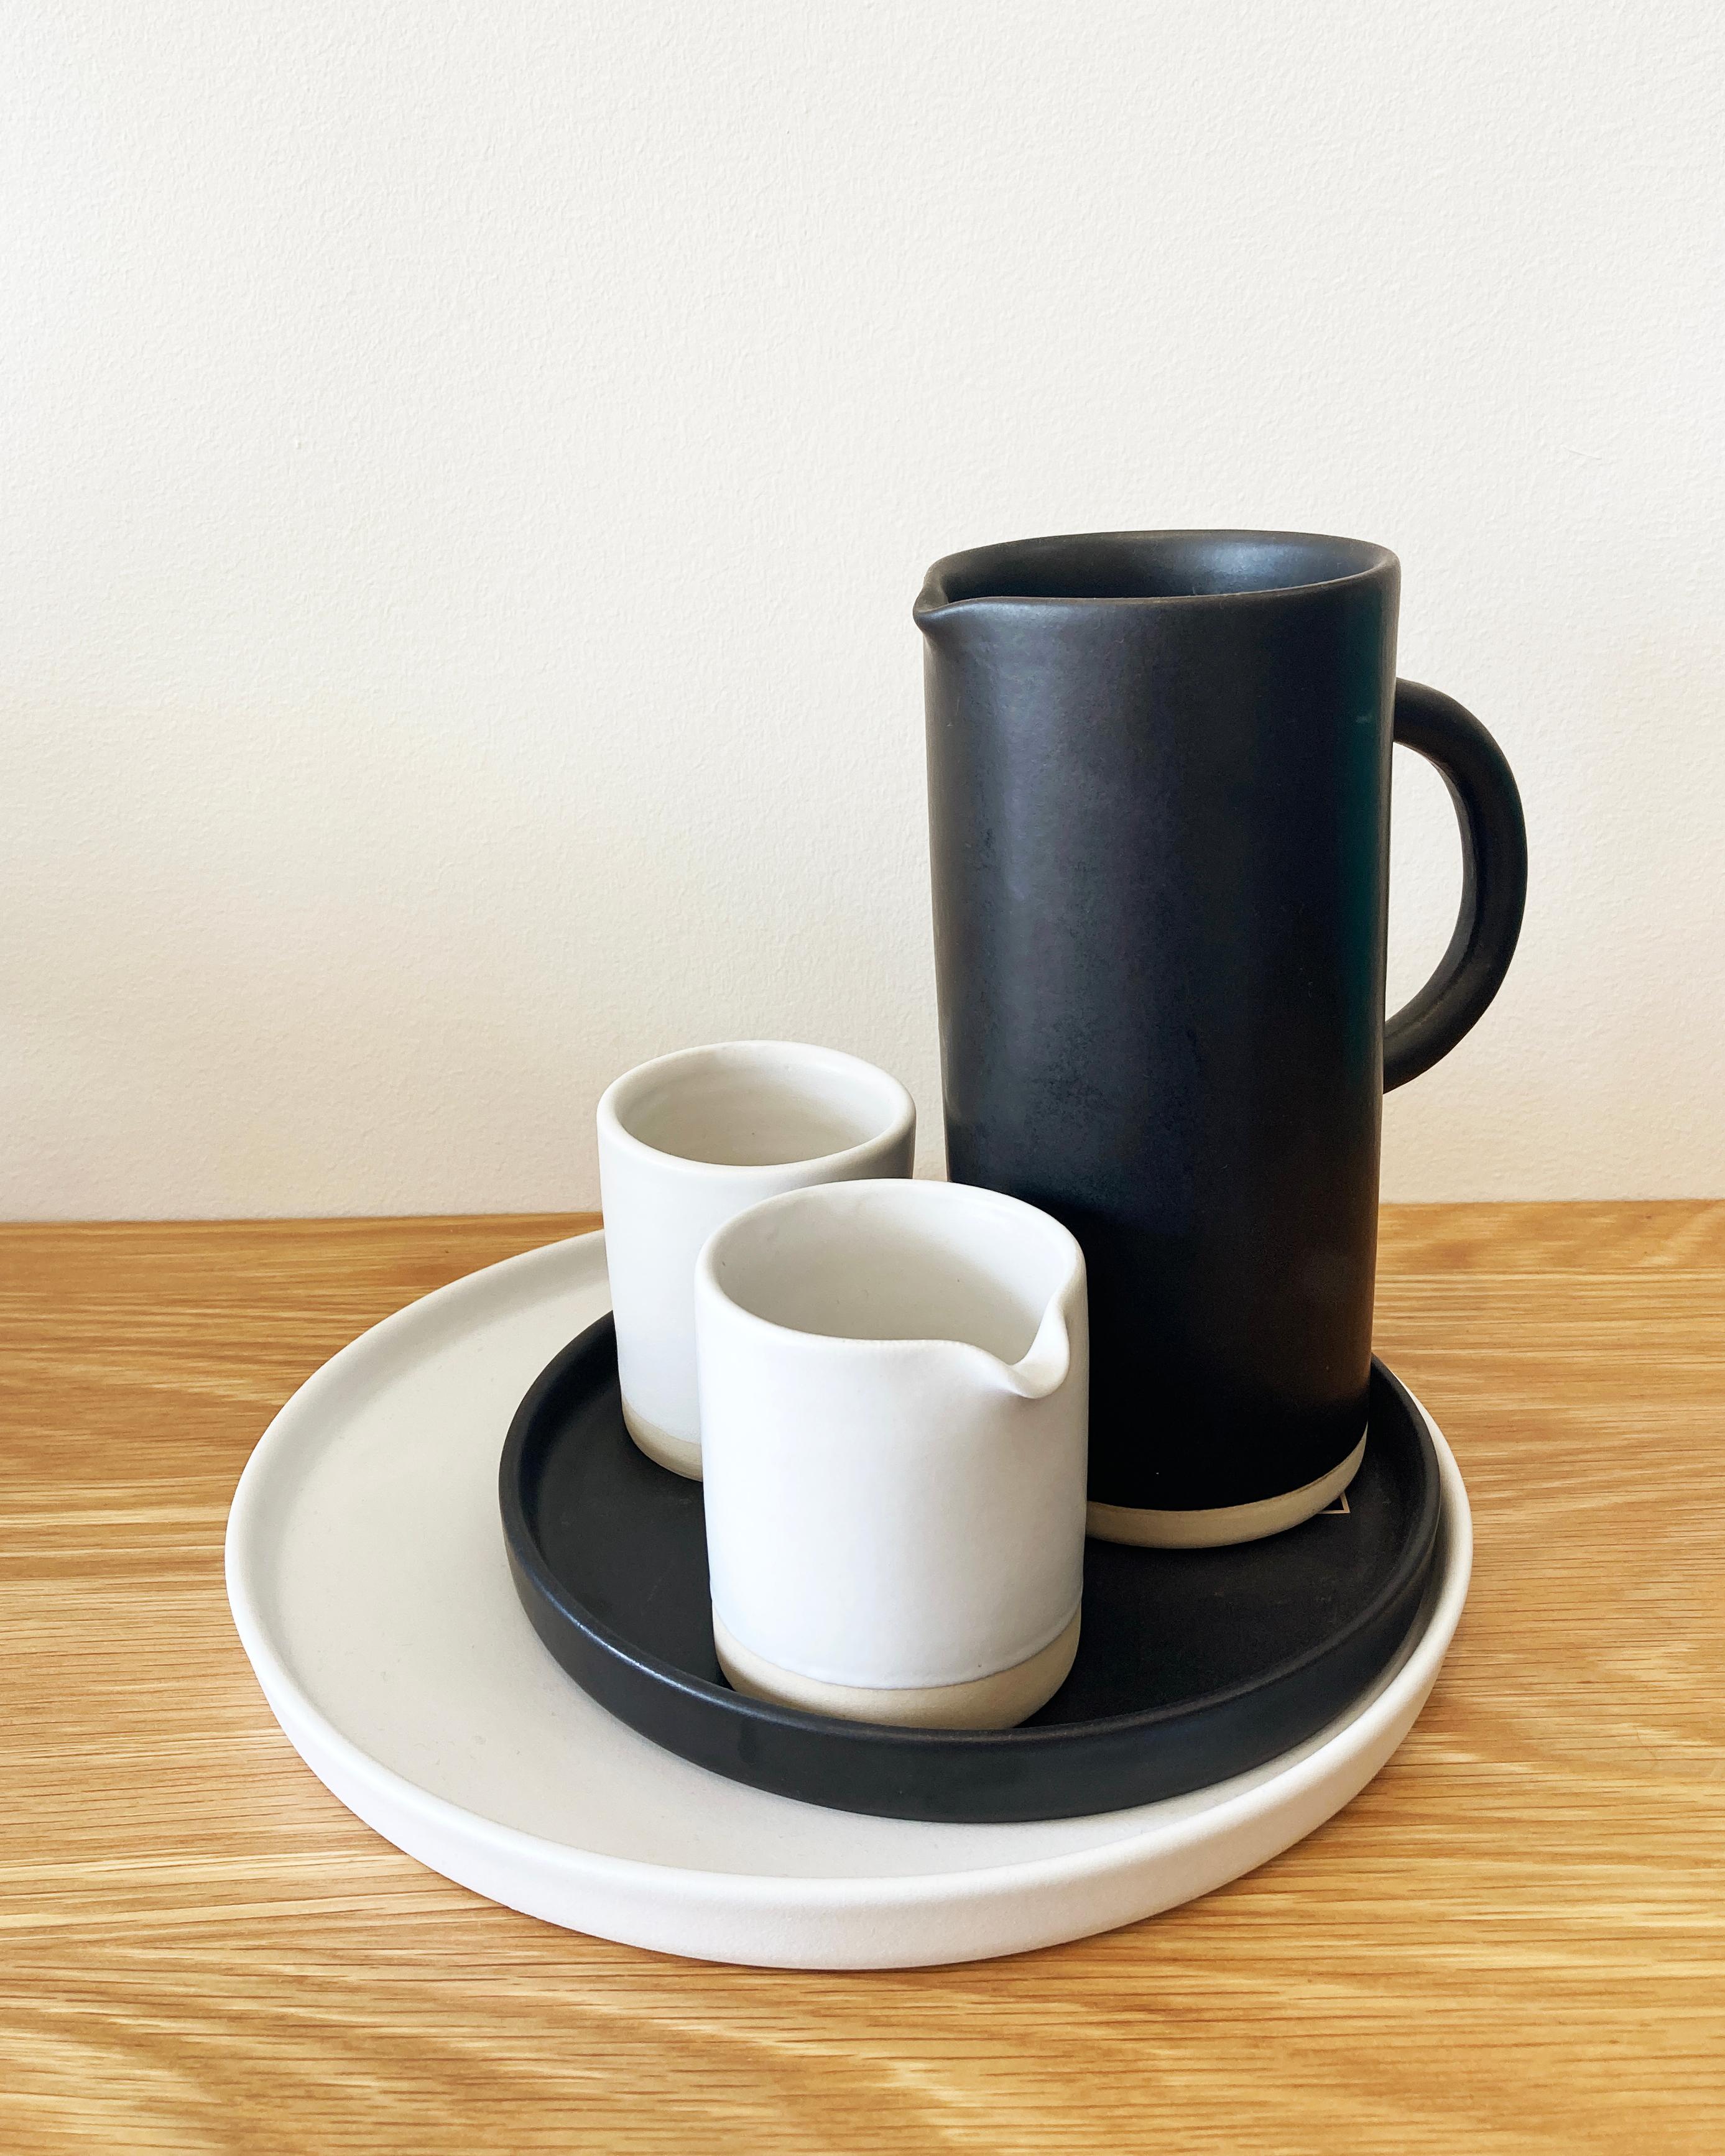 Perfect for serving cream, milk, or milk substitute for your morning tea or coffee. These are handmade stoneware, so they are dishwasher and microwave safe. Also available in black. 

Handmade and hand painted ceramics from Portugal, these beautiful